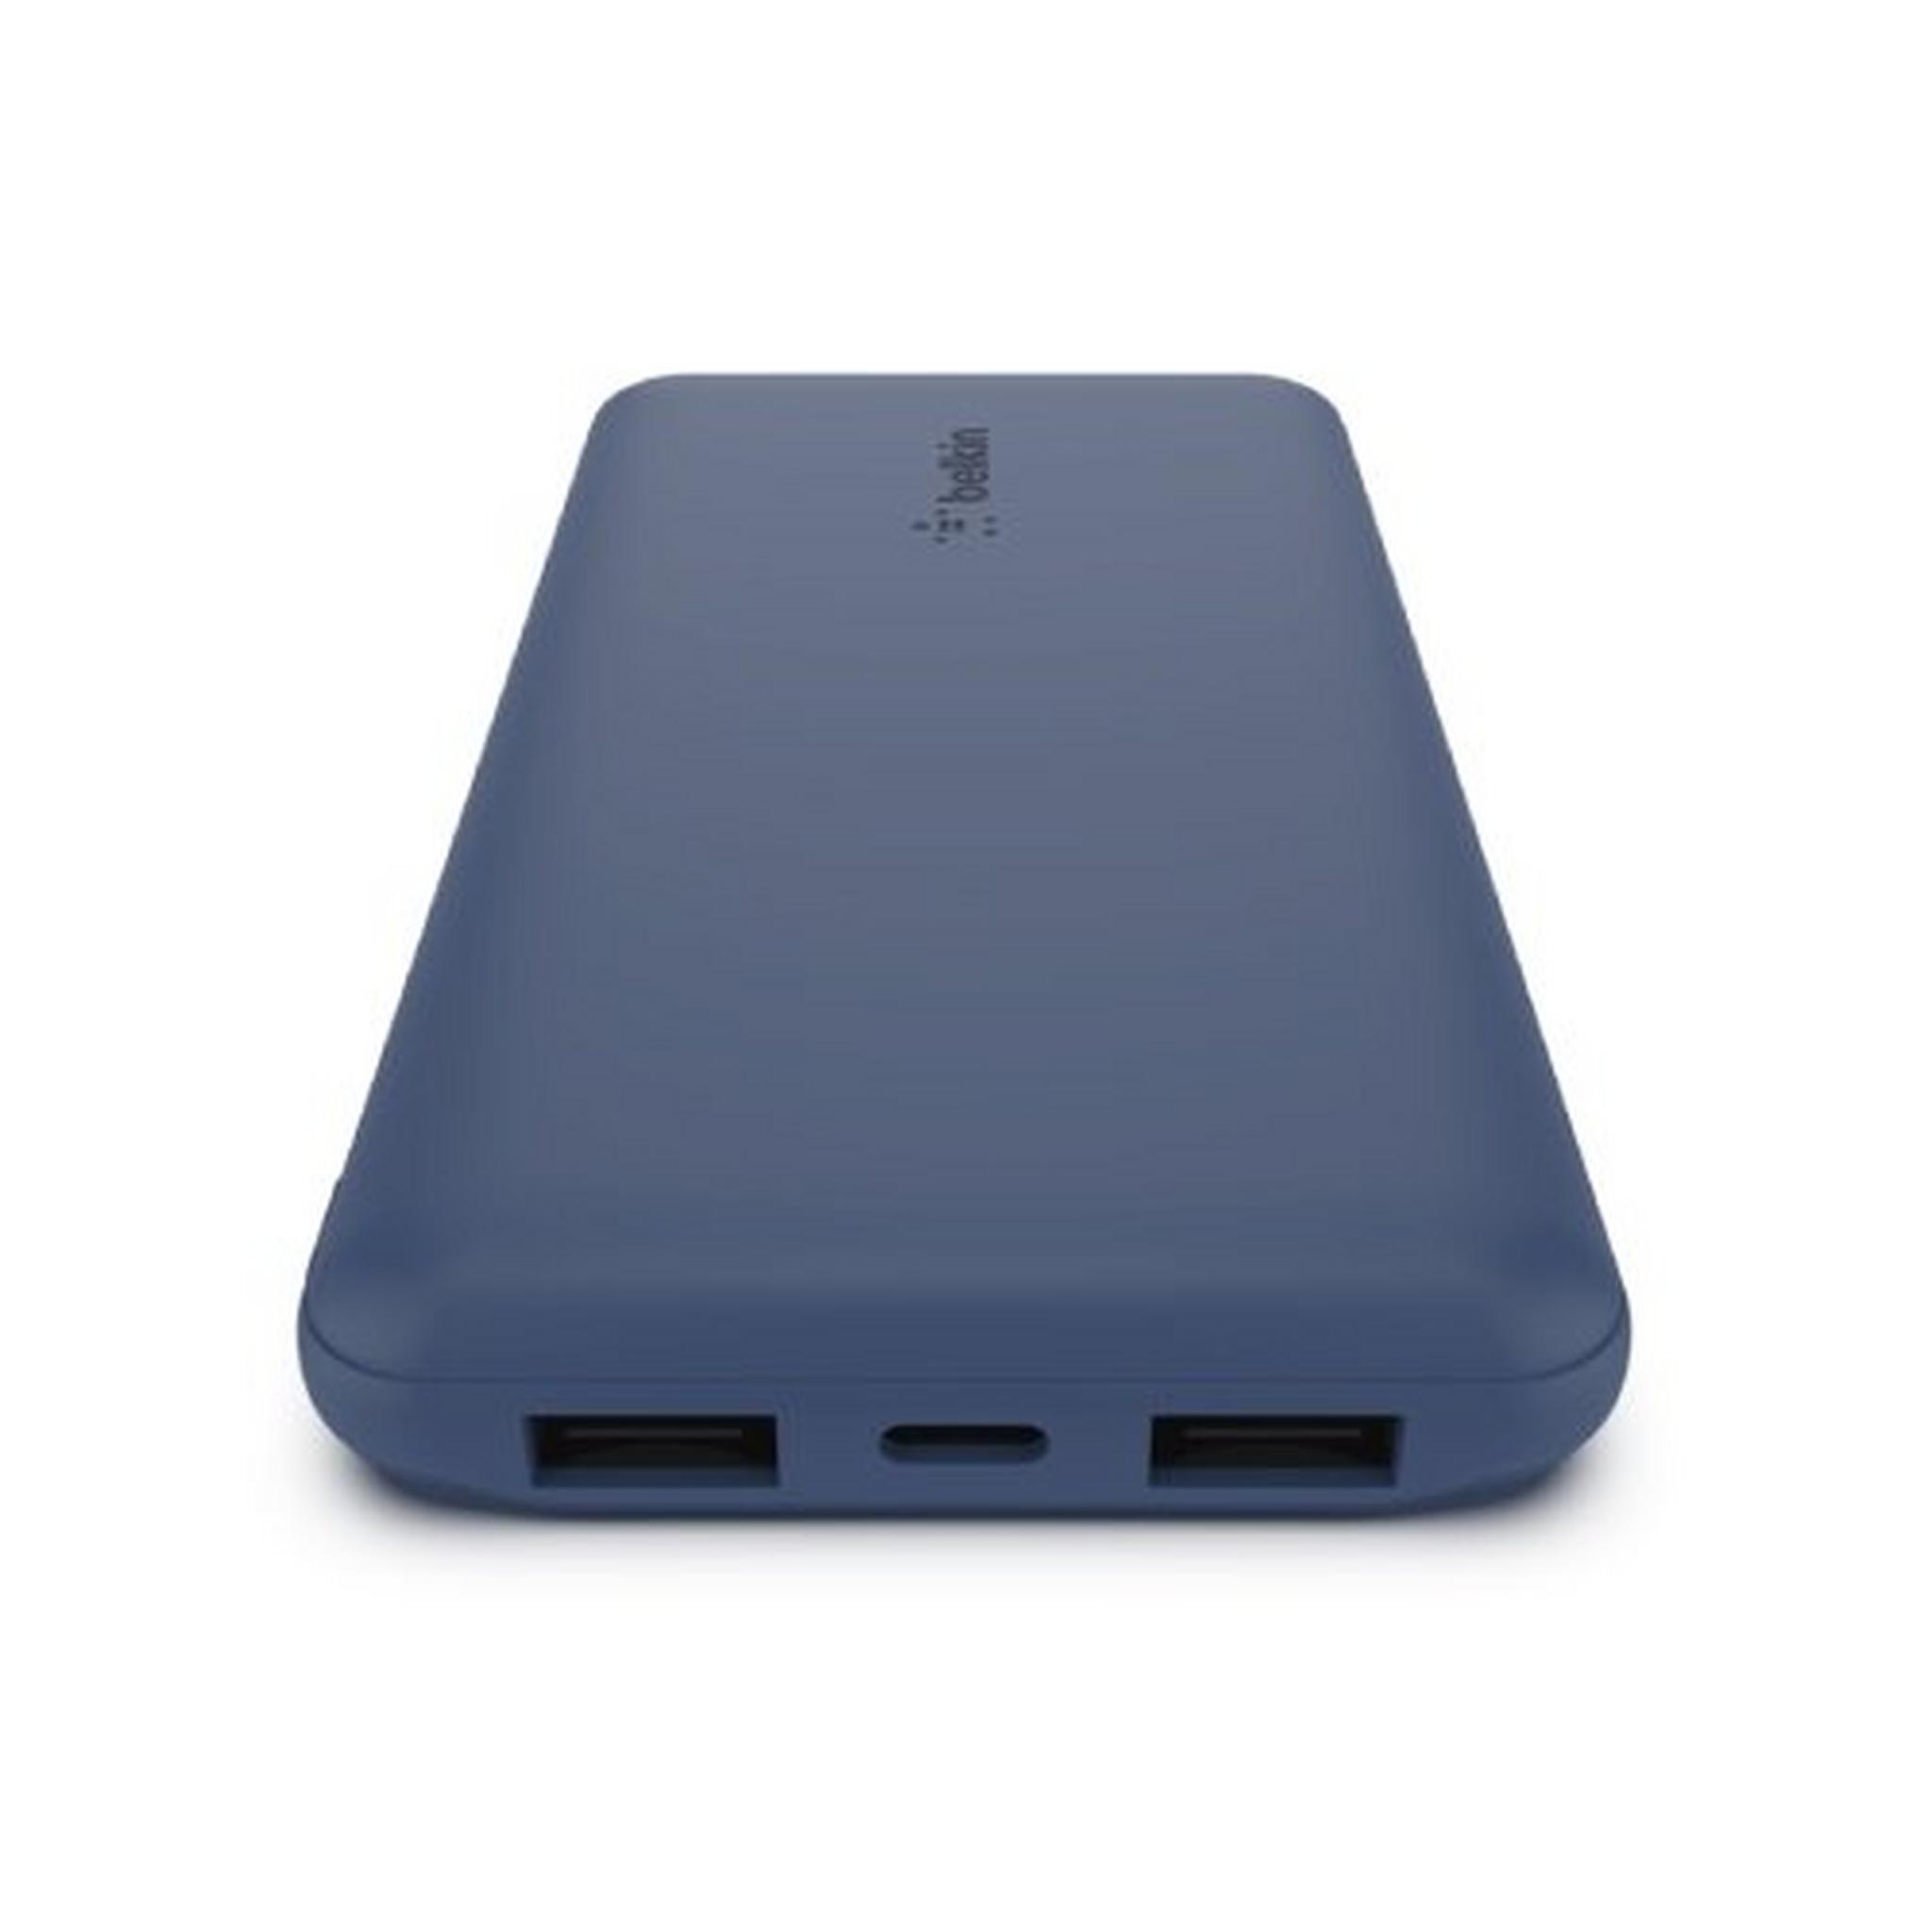 Belkin 10000mAh 15W Power Bank + USB-A to USB-C Cable - Blue